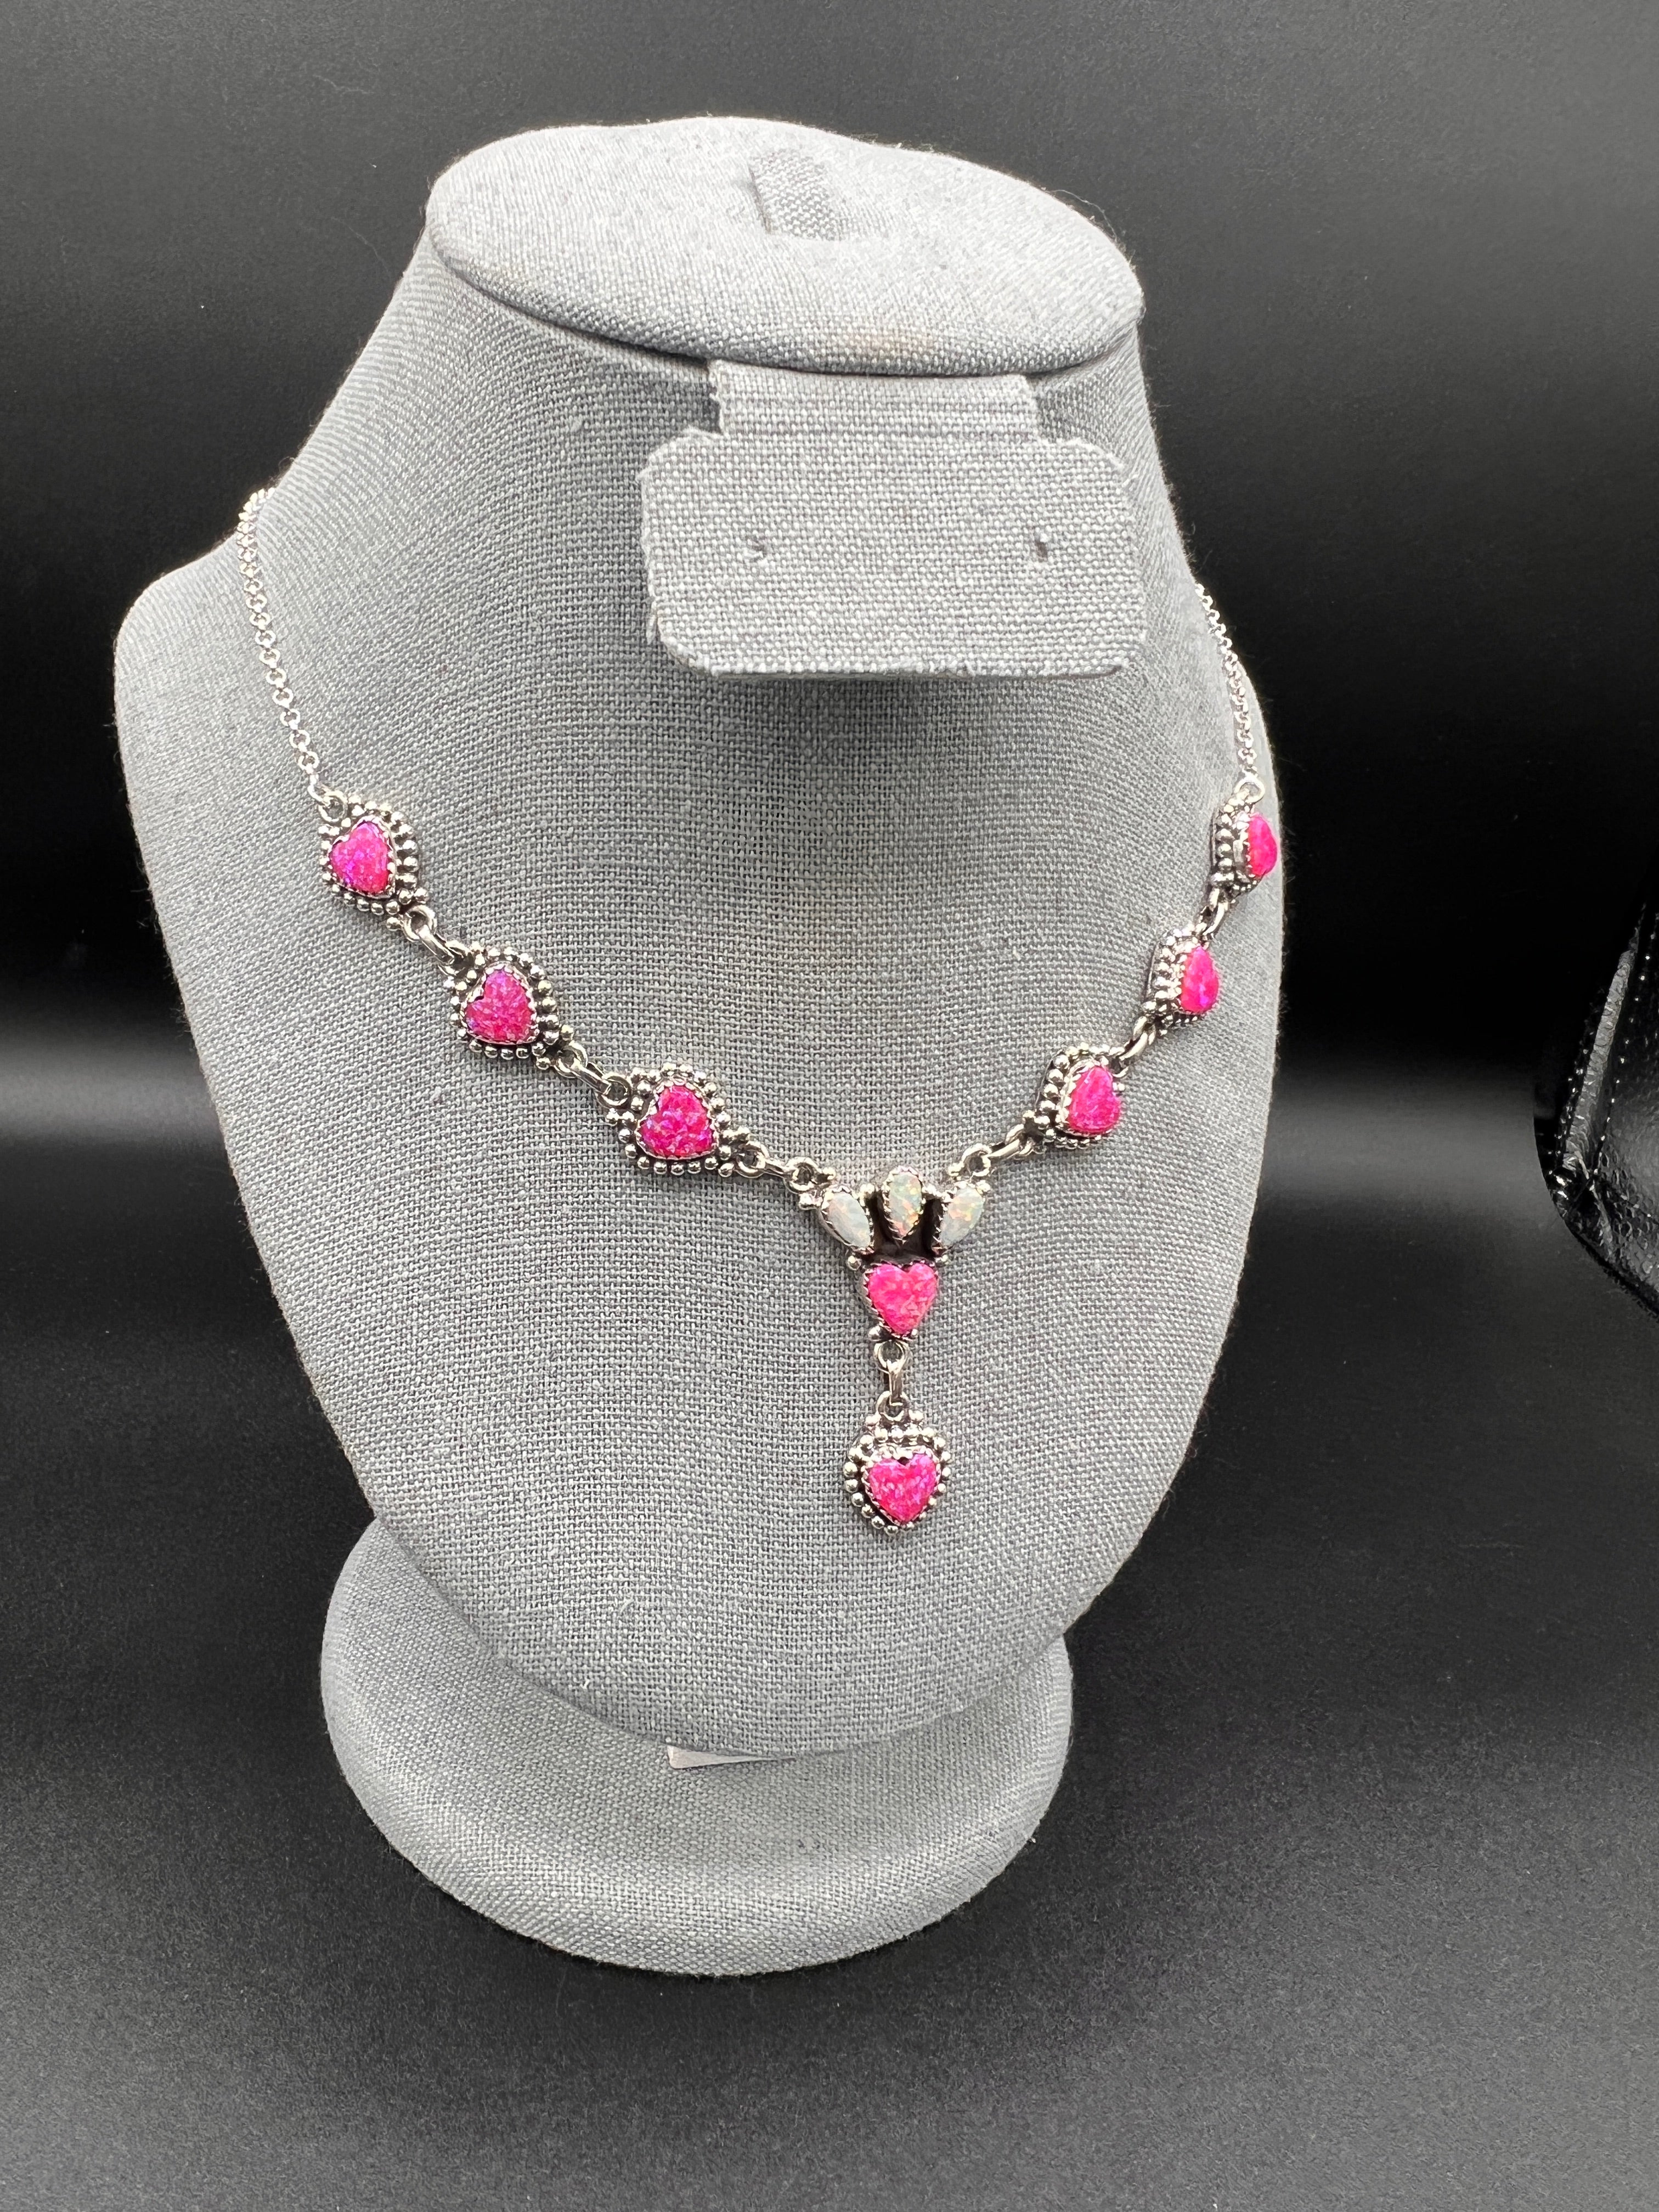 The Ethereal Elegance Sterling Silver Necklace- Pink & White Fire Opal